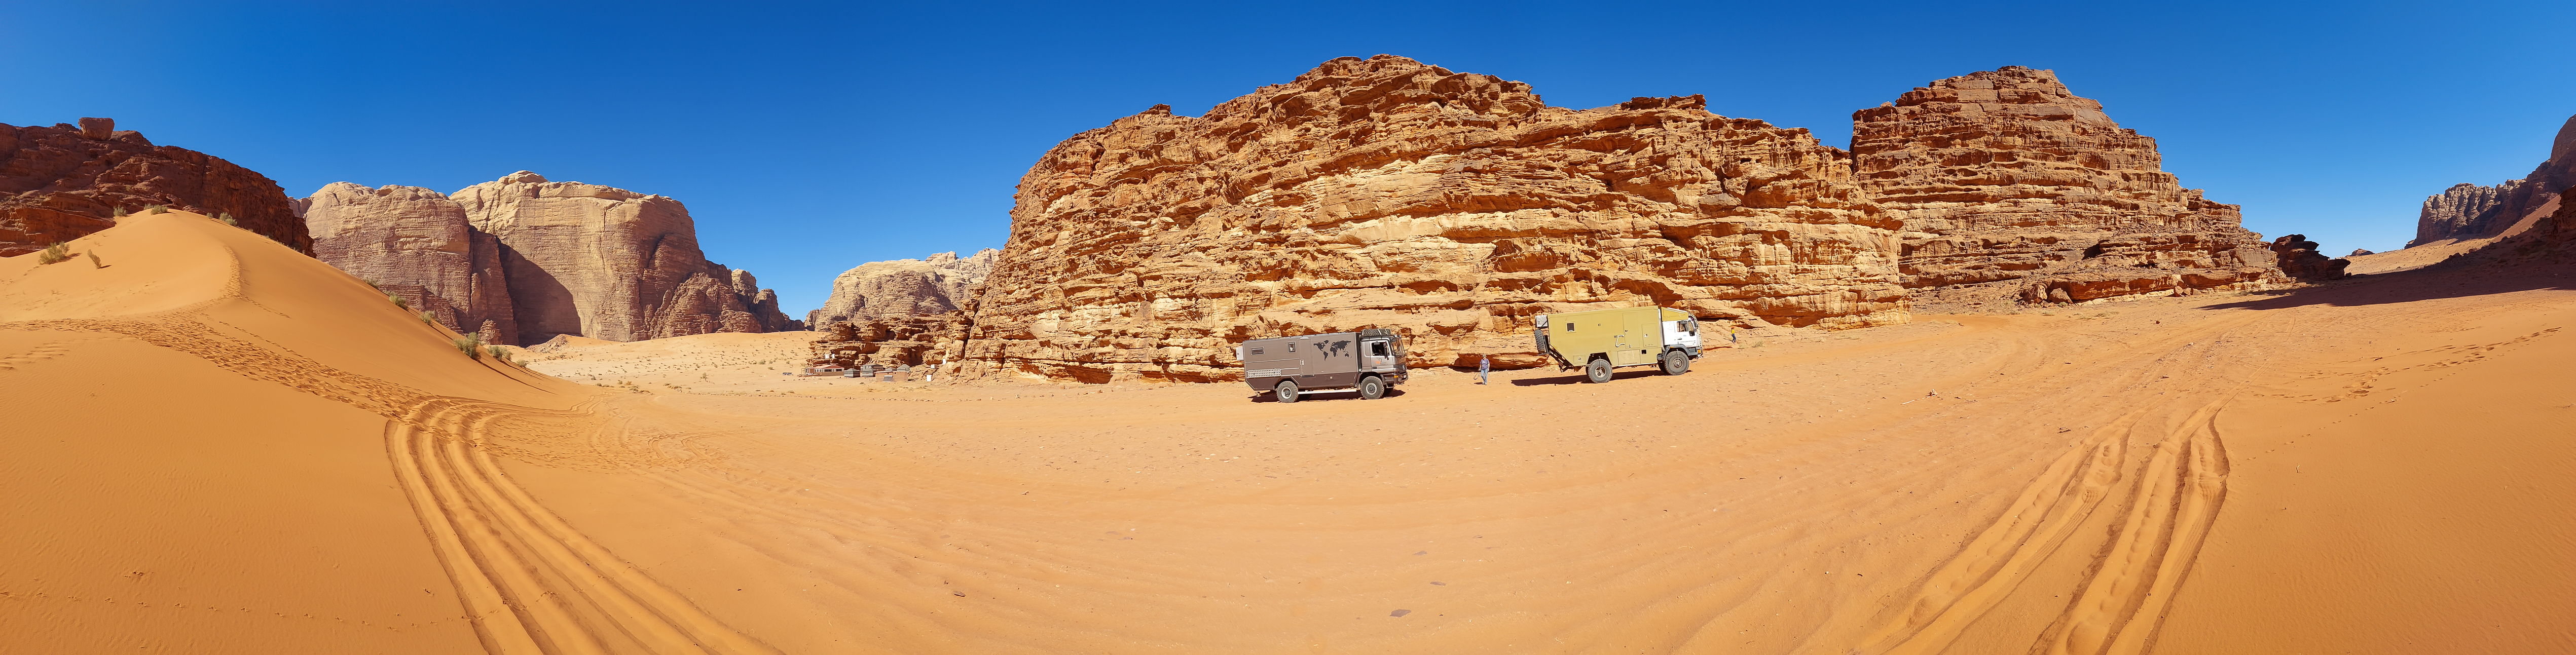 <span  class="uc_style_uc_tiles_grid_image_elementor_uc_items_attribute_title" style="color:#ffffff;">Another highlight in Jordan: Wadi Rum (you may know it from the movie 'Lawrence of Arabia")</span>